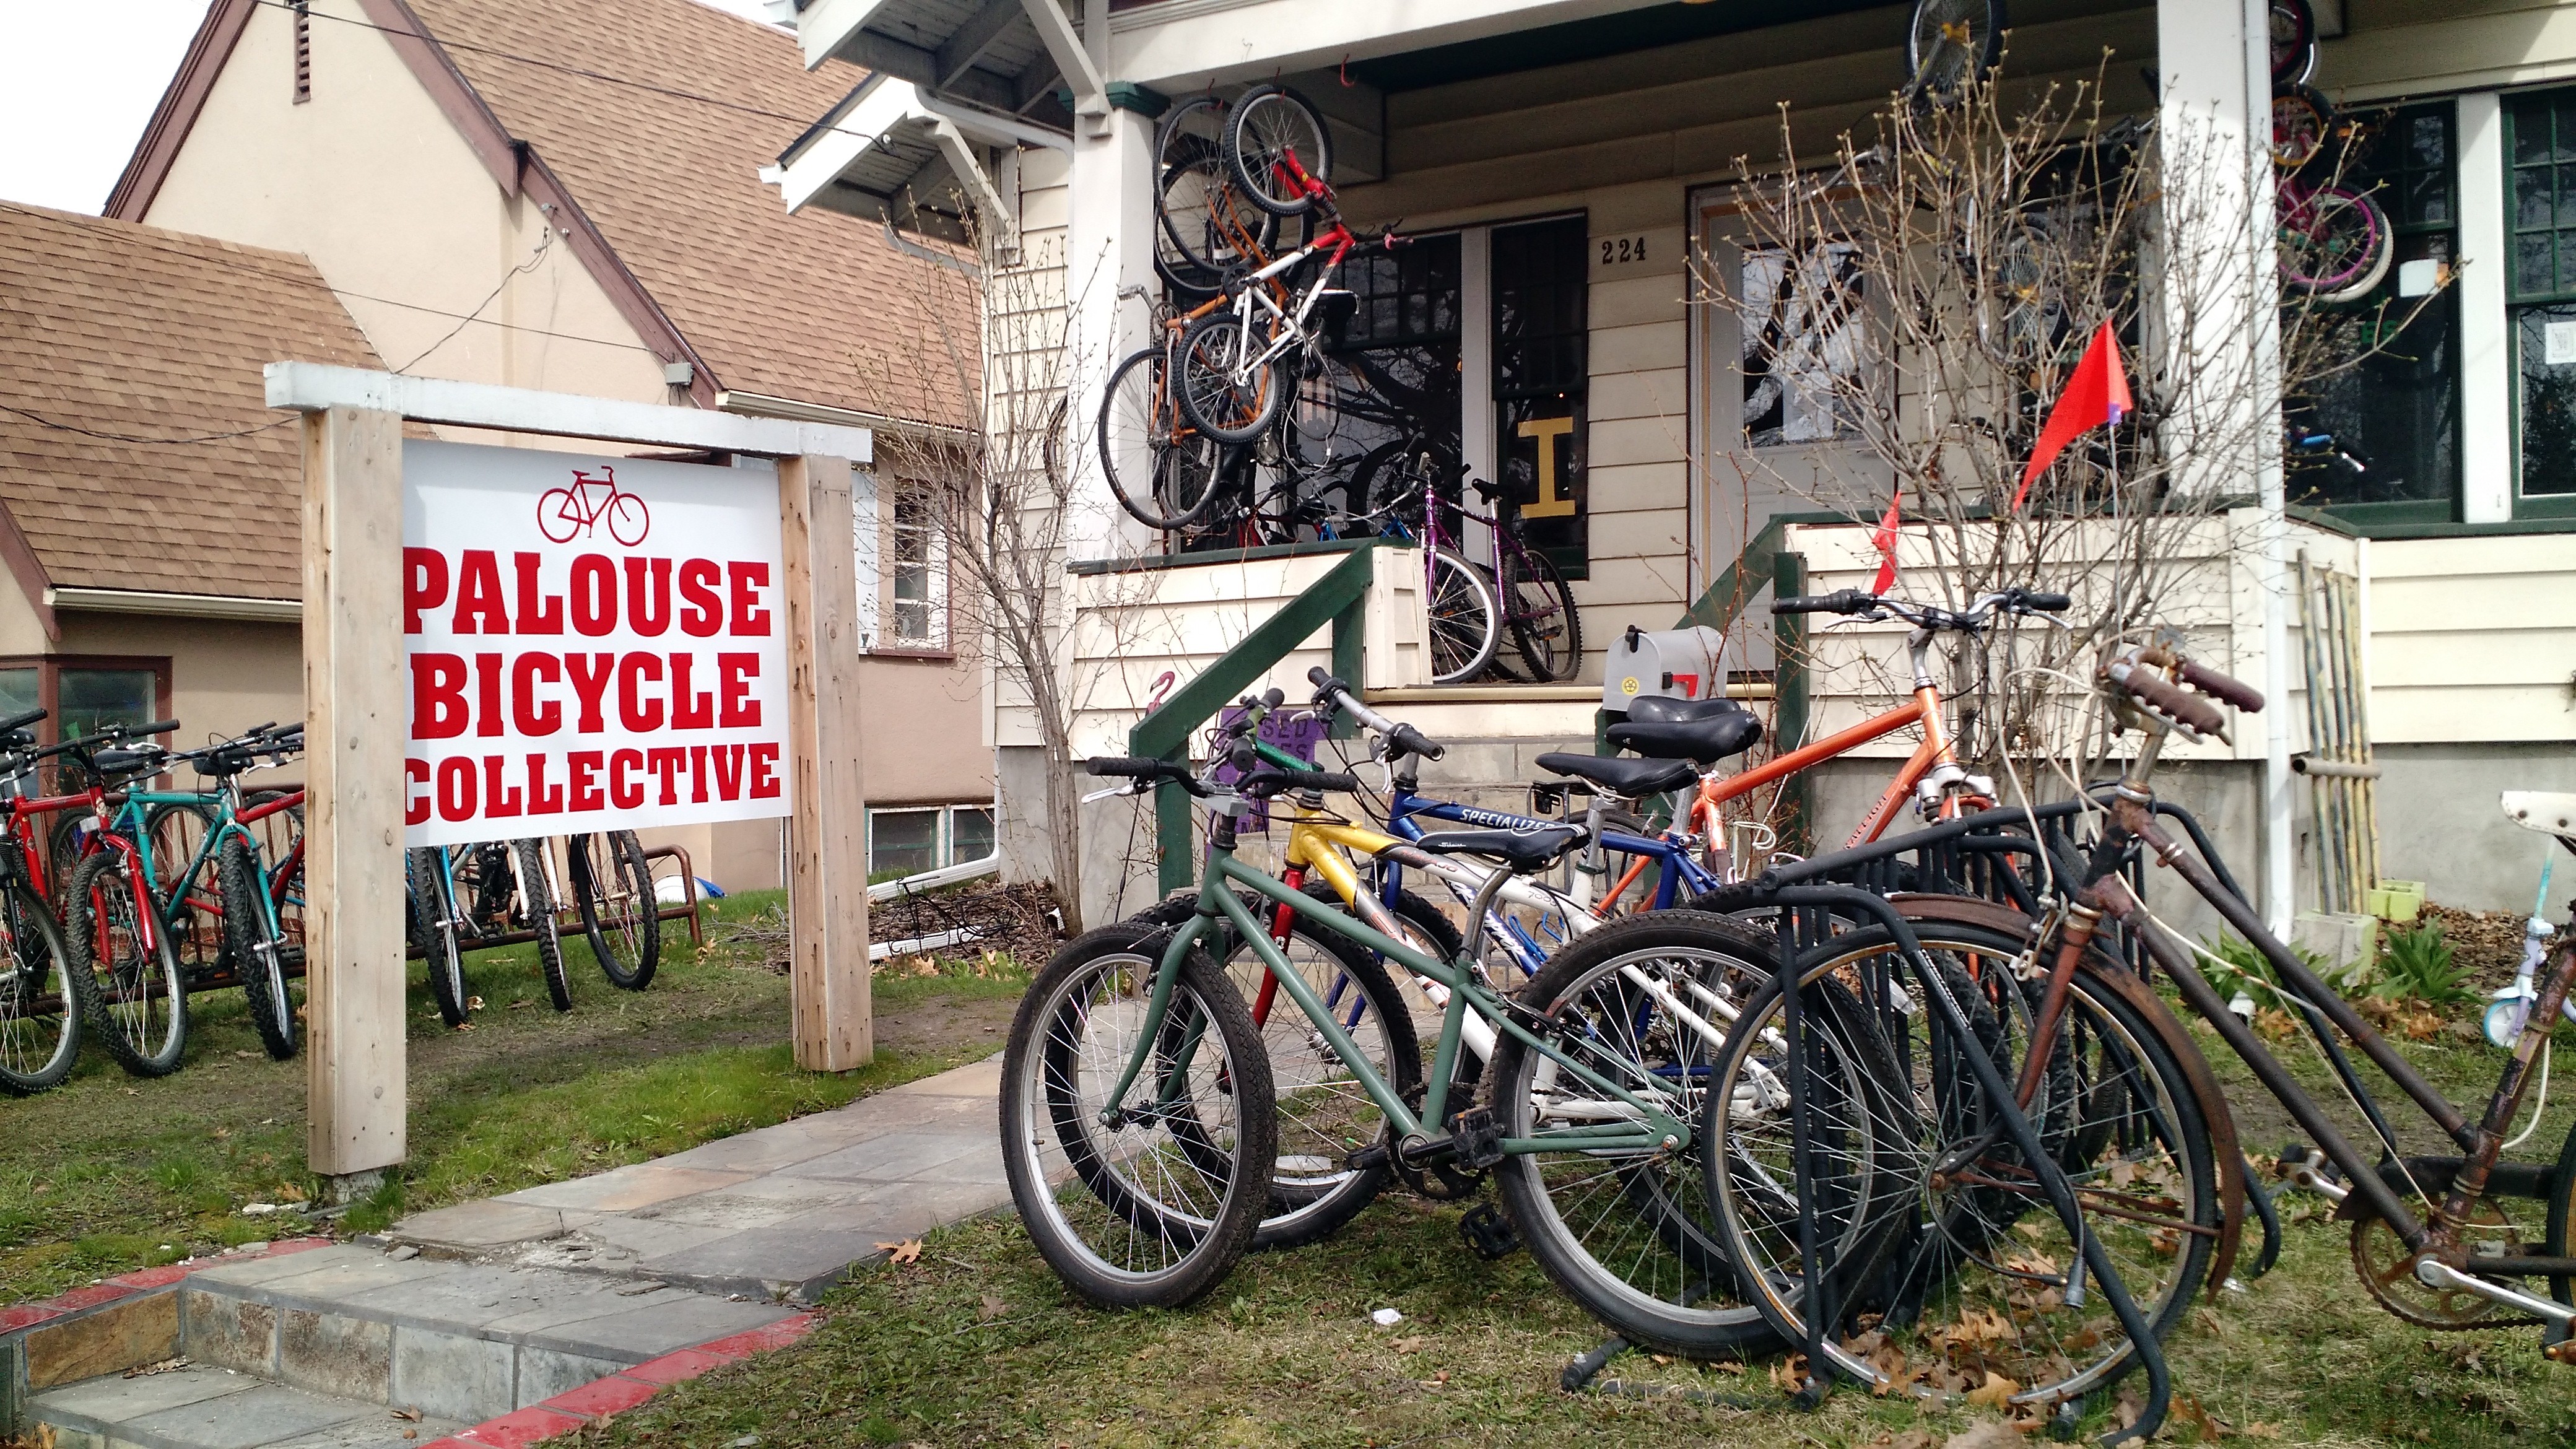 And the winner for Best Bike Shop is ... Palouse Bicycle Collective